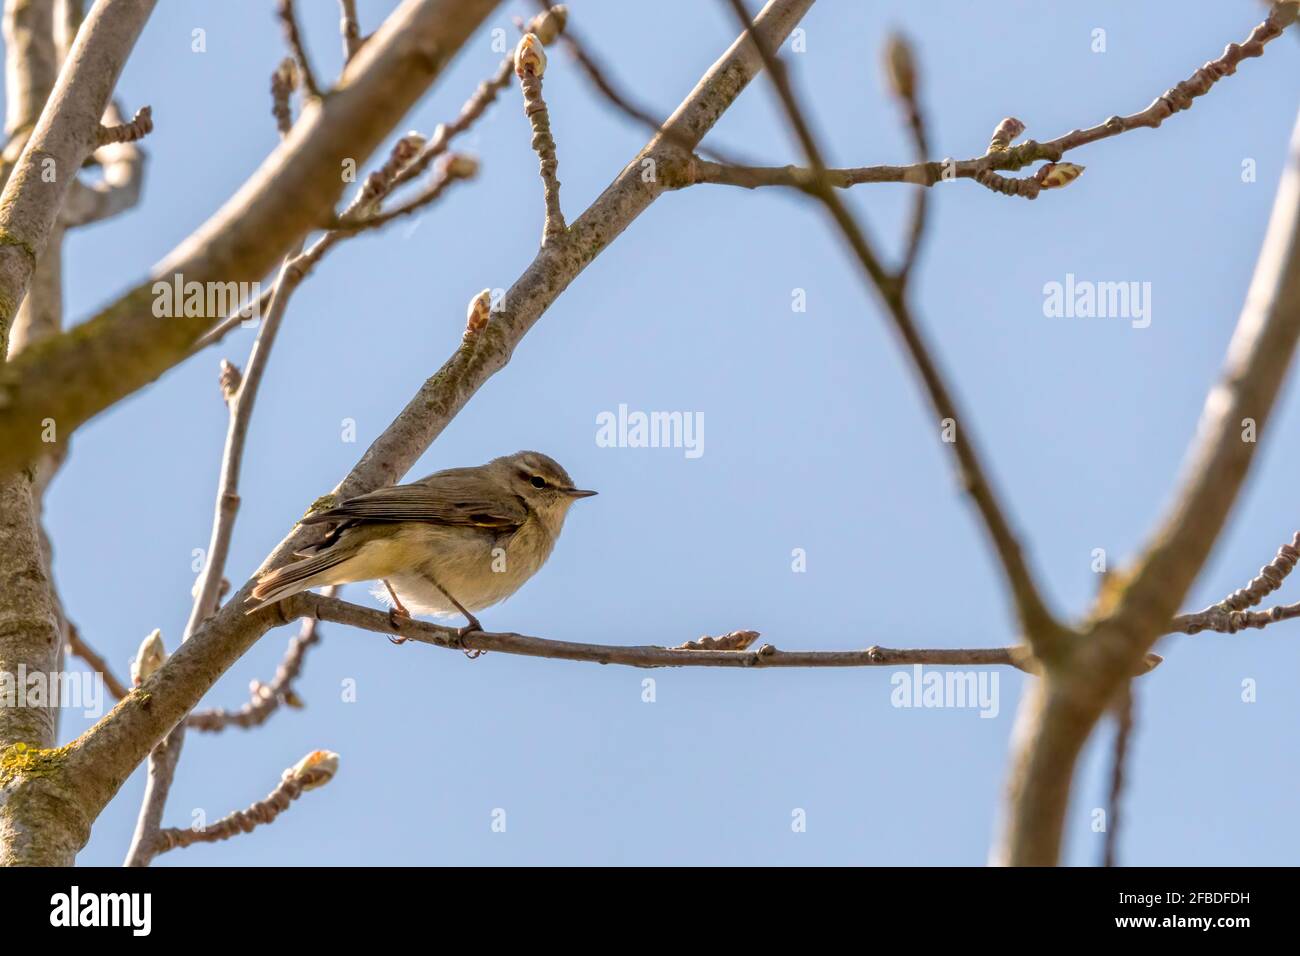 Chiffchaff, Phylloscopus collybita, perched on the branch of a tree. Stock Photo